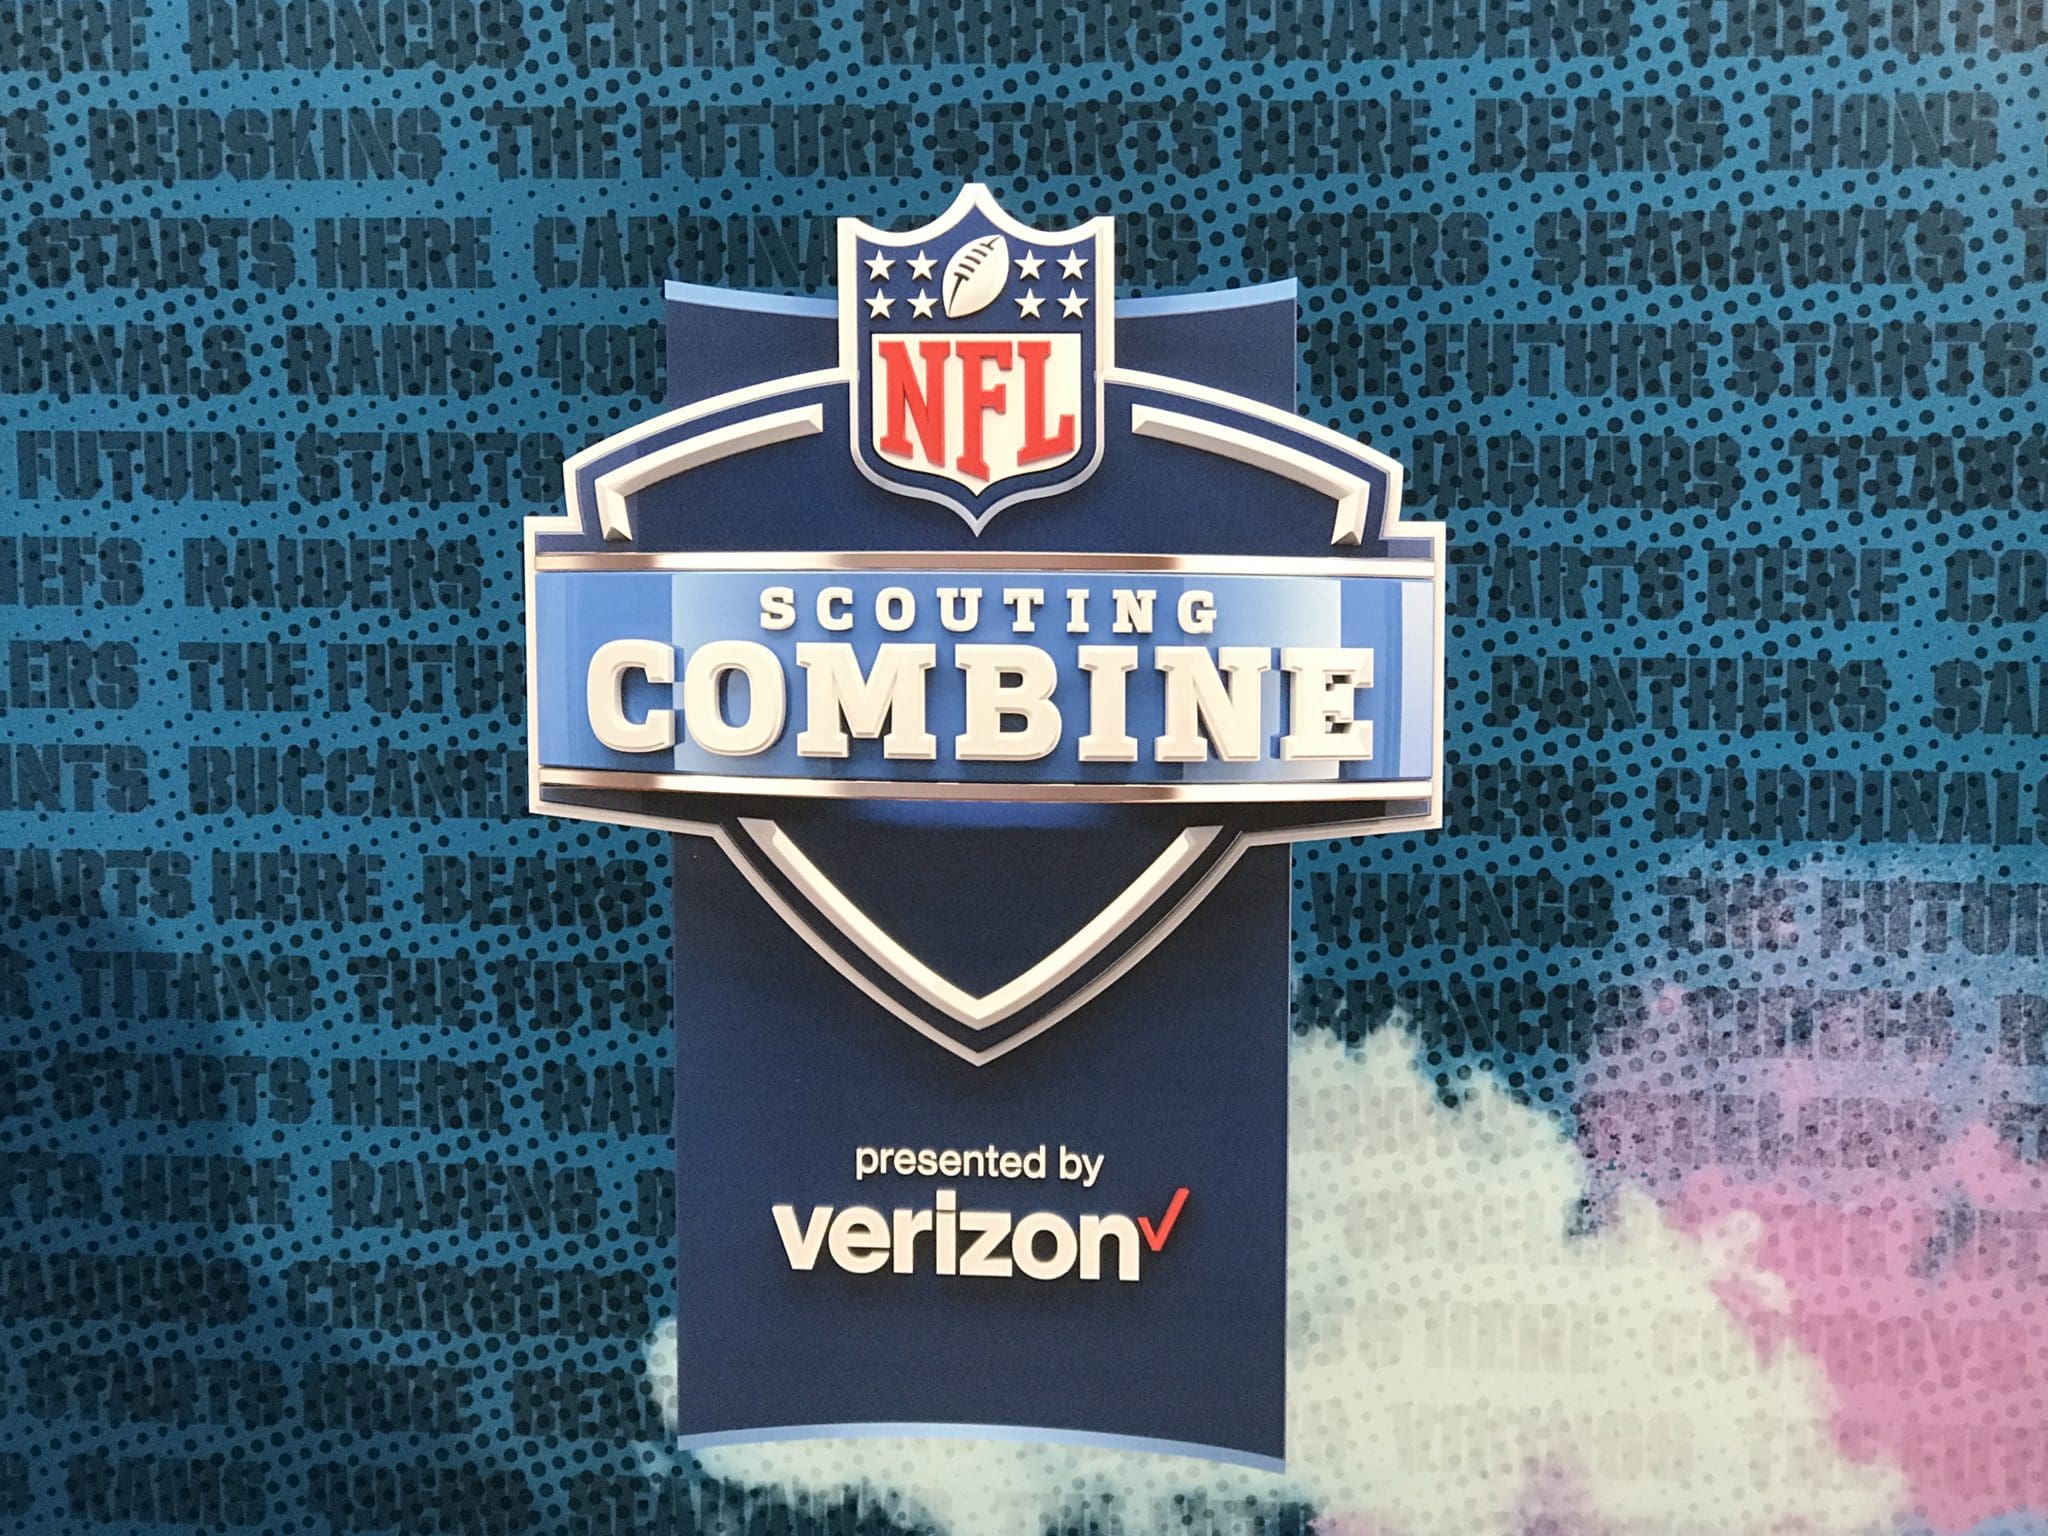 NFL: When is the NFL combine 2021?